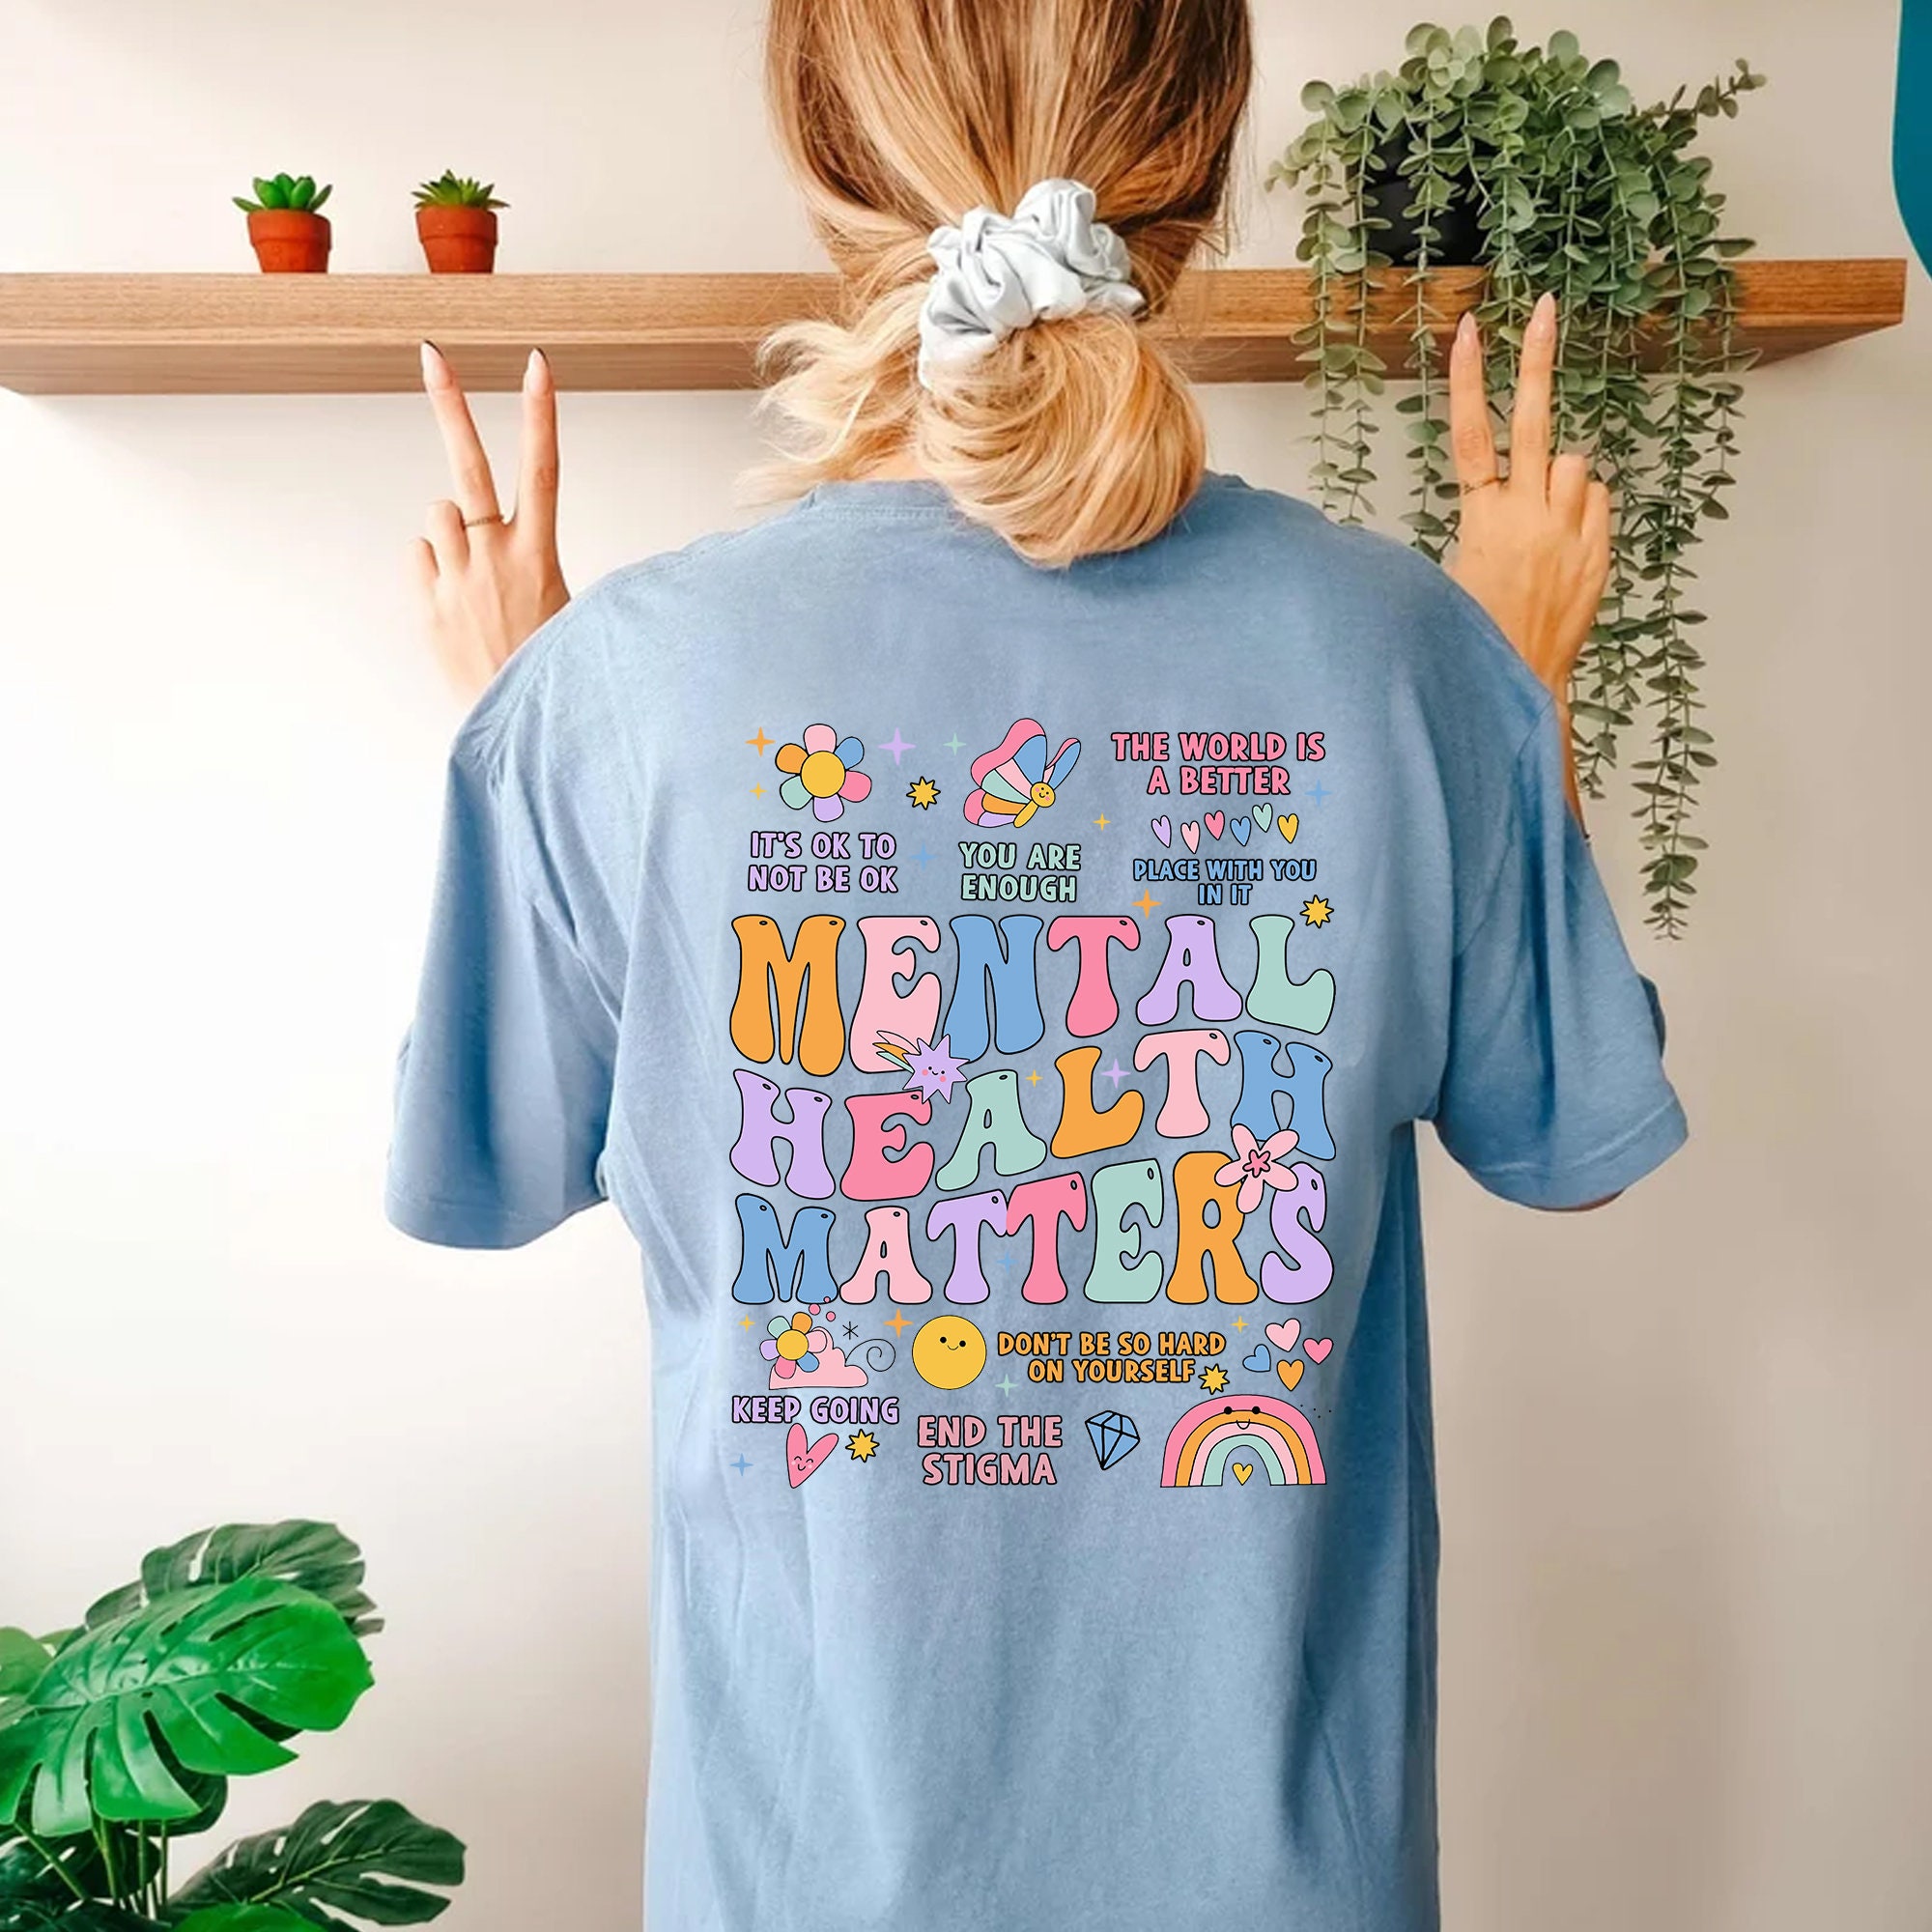 Discover Mental Health Matters Shirt, Mental Health Shirts, Women Inspirational Shirts, Inspirational Gifts, Gift for Her